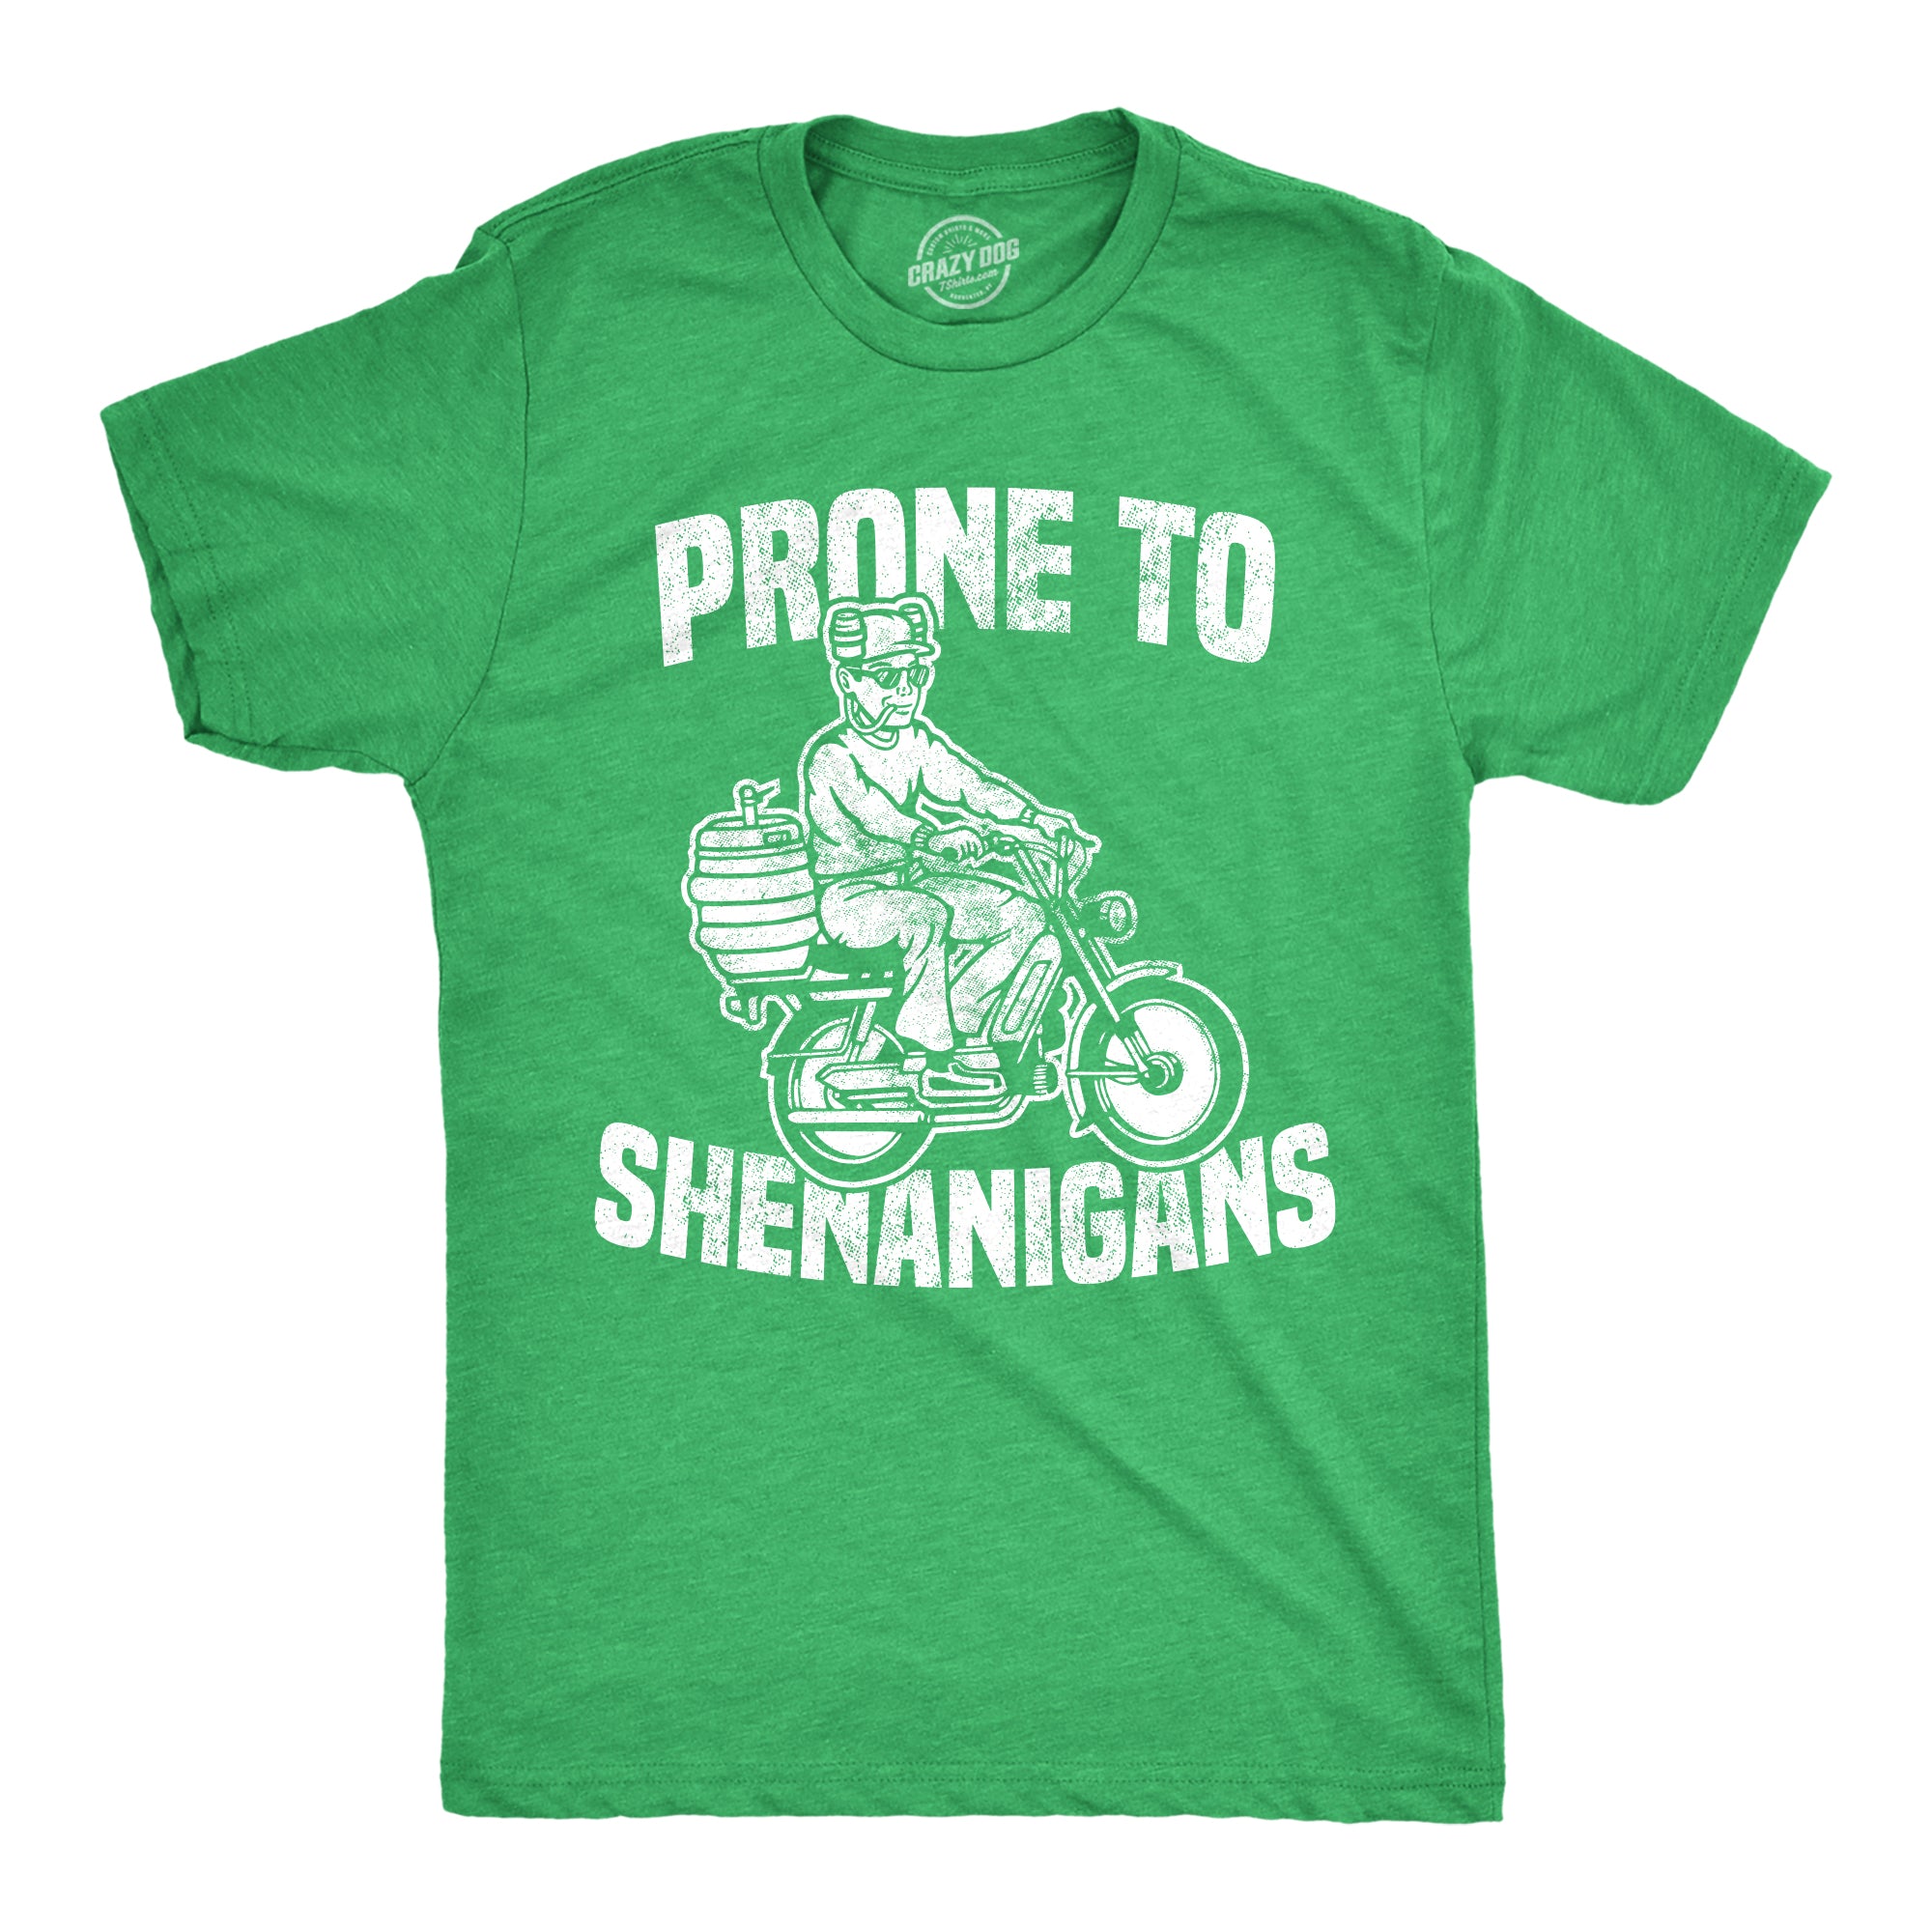 Funny Heather Green - Prone to Shenanigans Prone To Shenanigans Mens T Shirt Nerdy Saint Patrick's Day Tee